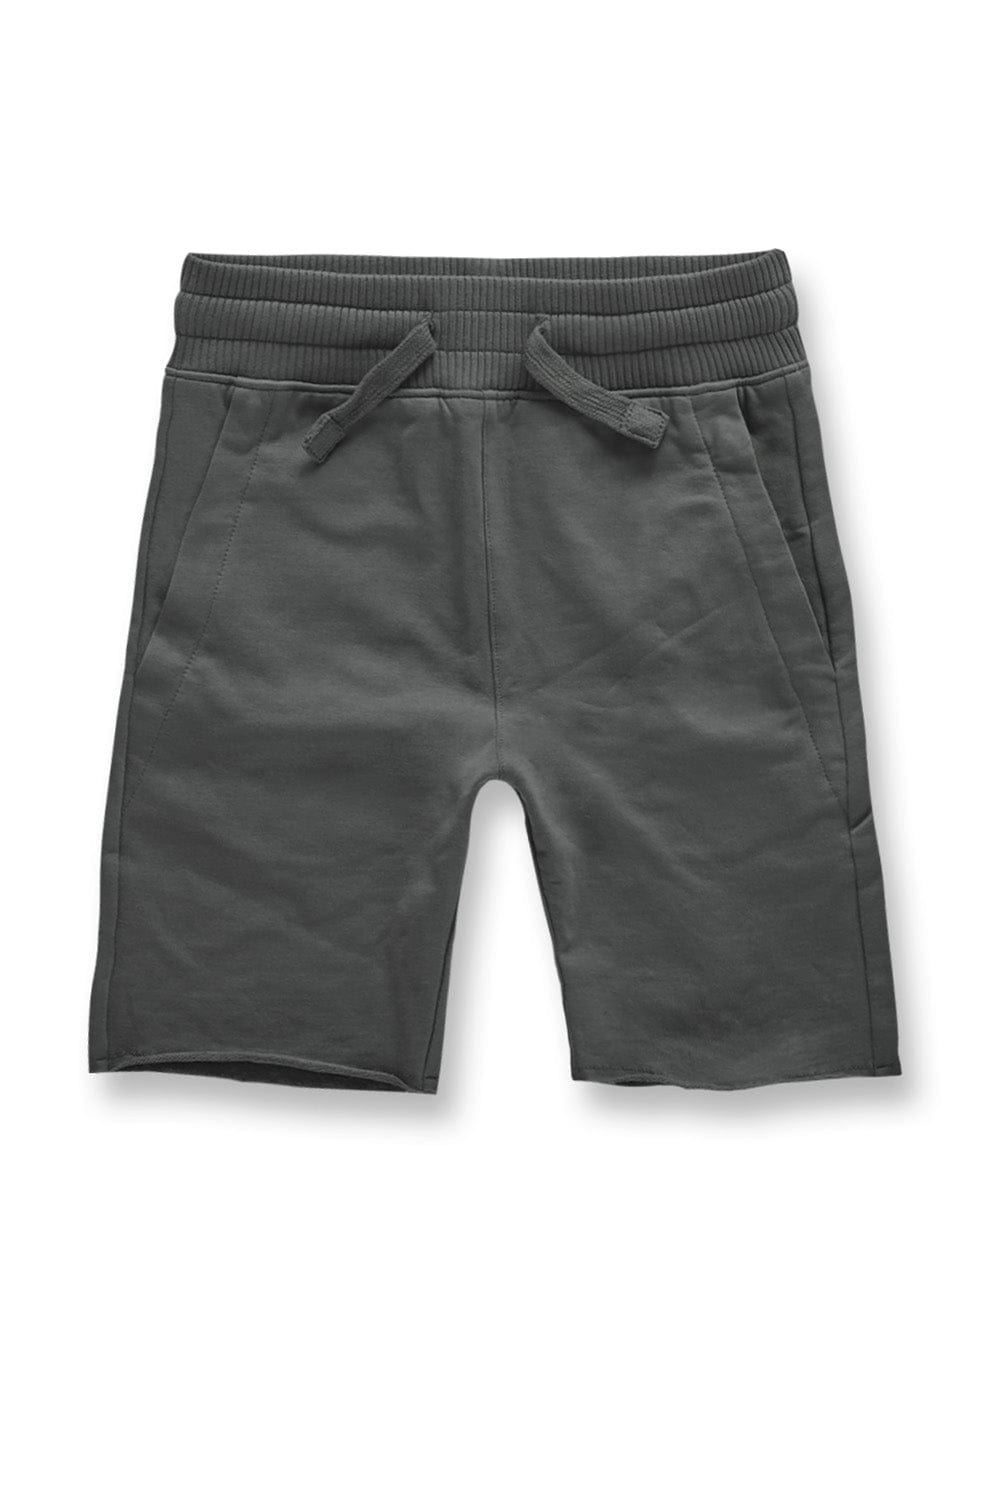 JC Kids Kids Palma French Terry Shorts (Name Your Price) Charcoal / 2